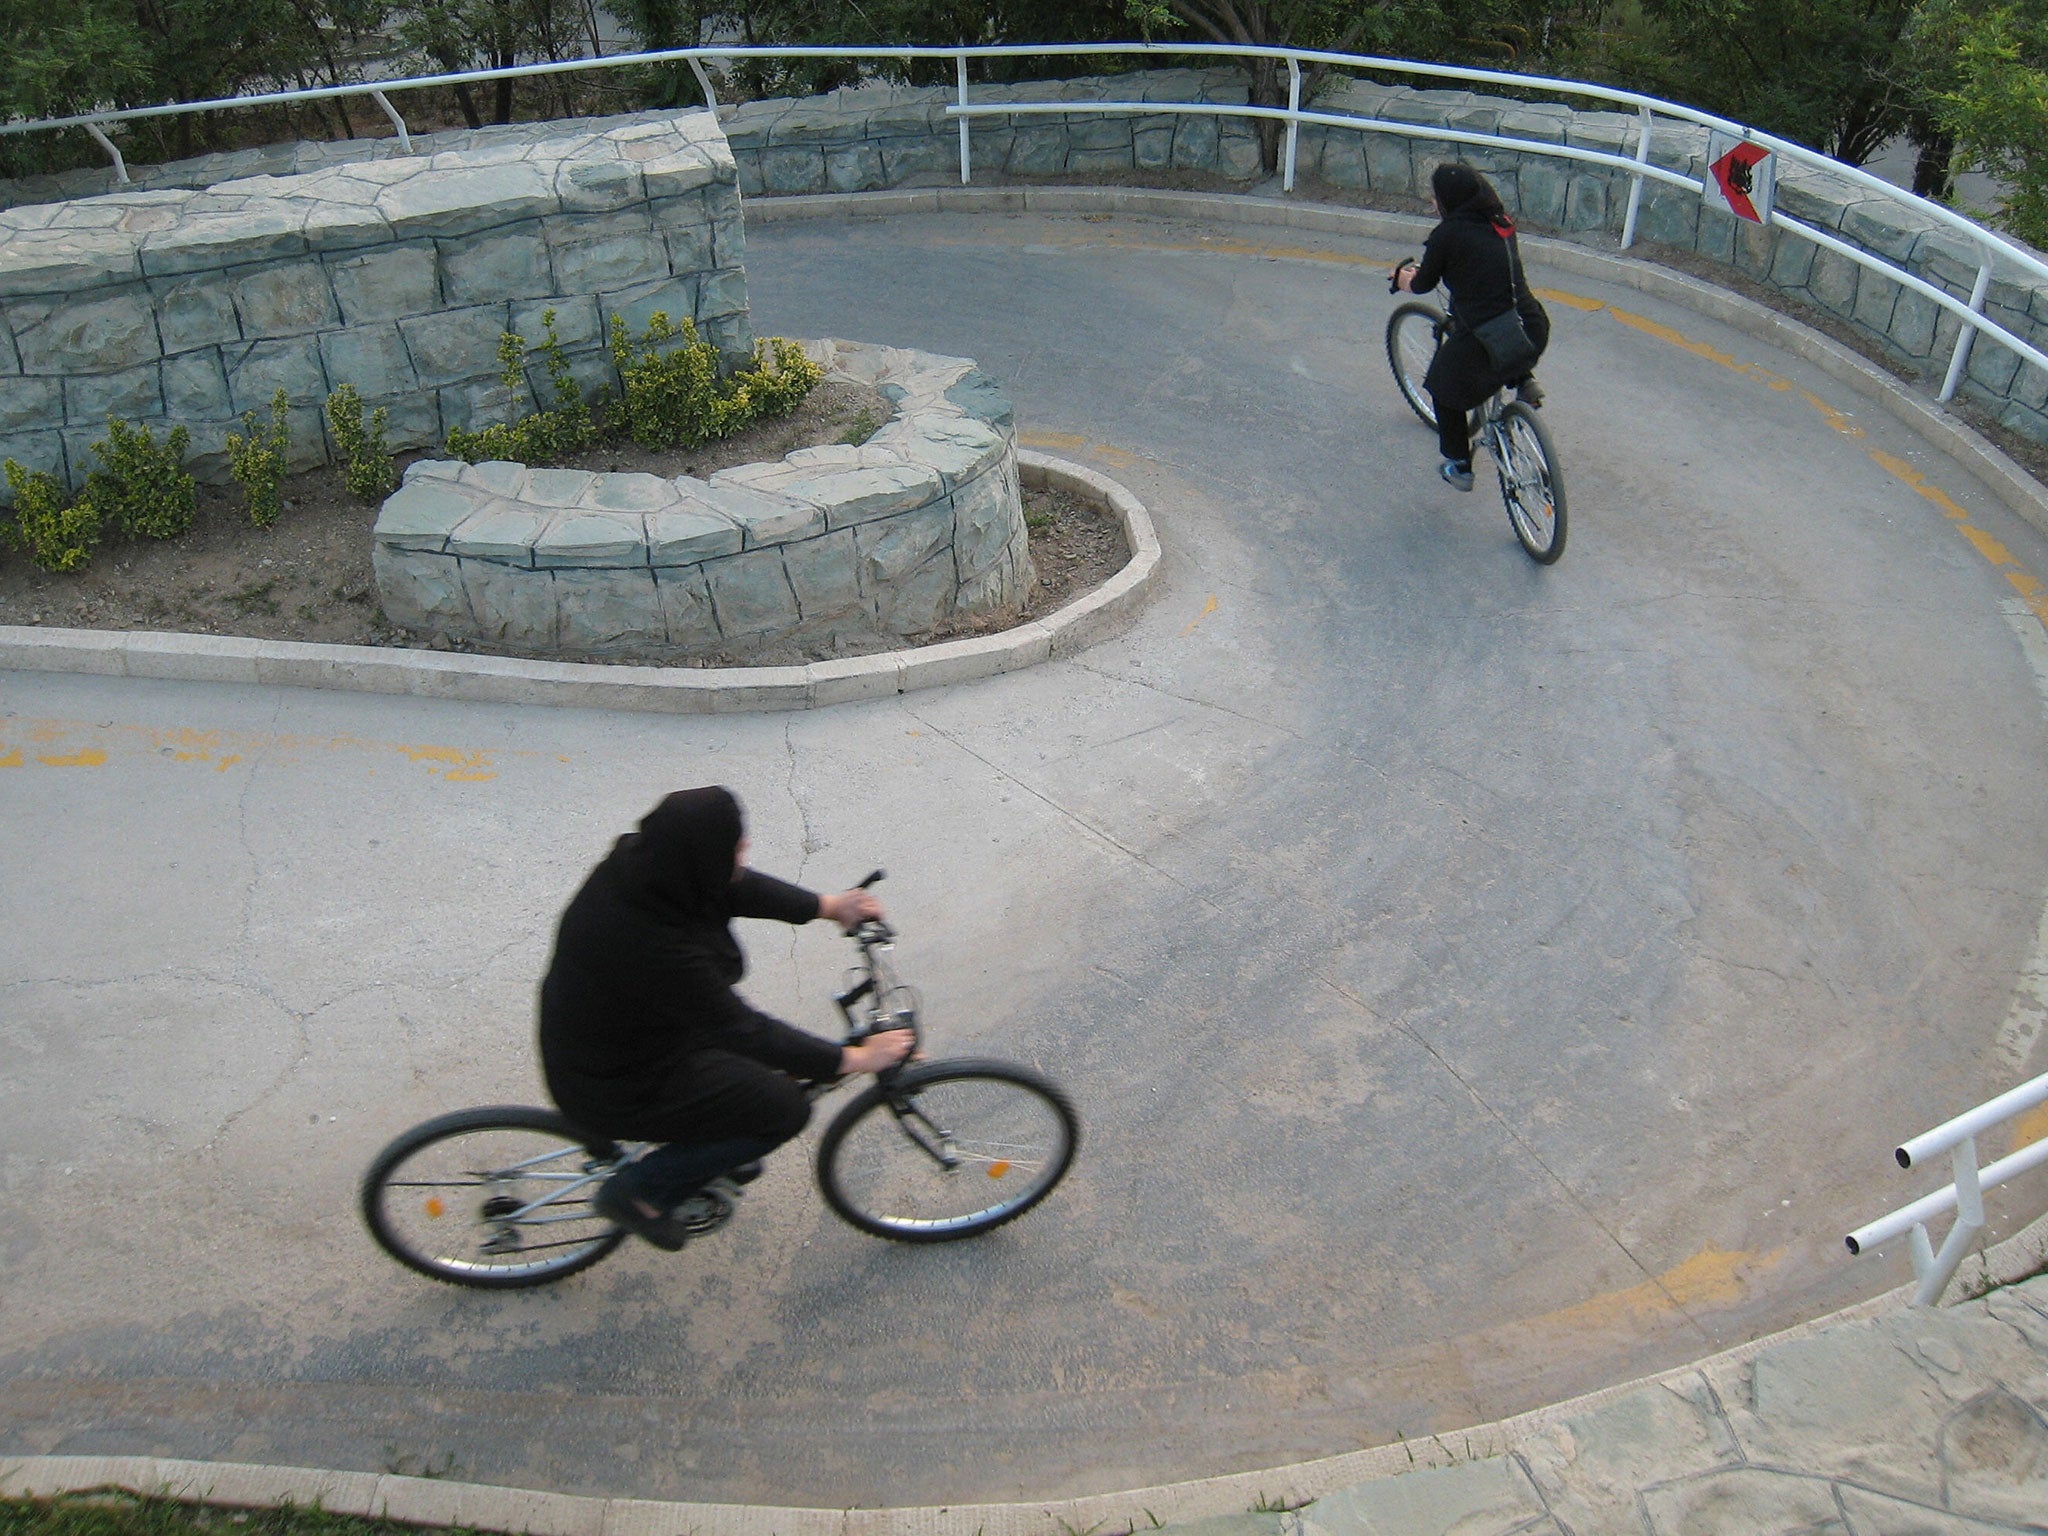 Iranian women ride their bicycles at Tehran's 'Mothers' Paradise' park, which is the Iranian capital's women-only public recreation area, on June 13 2008.